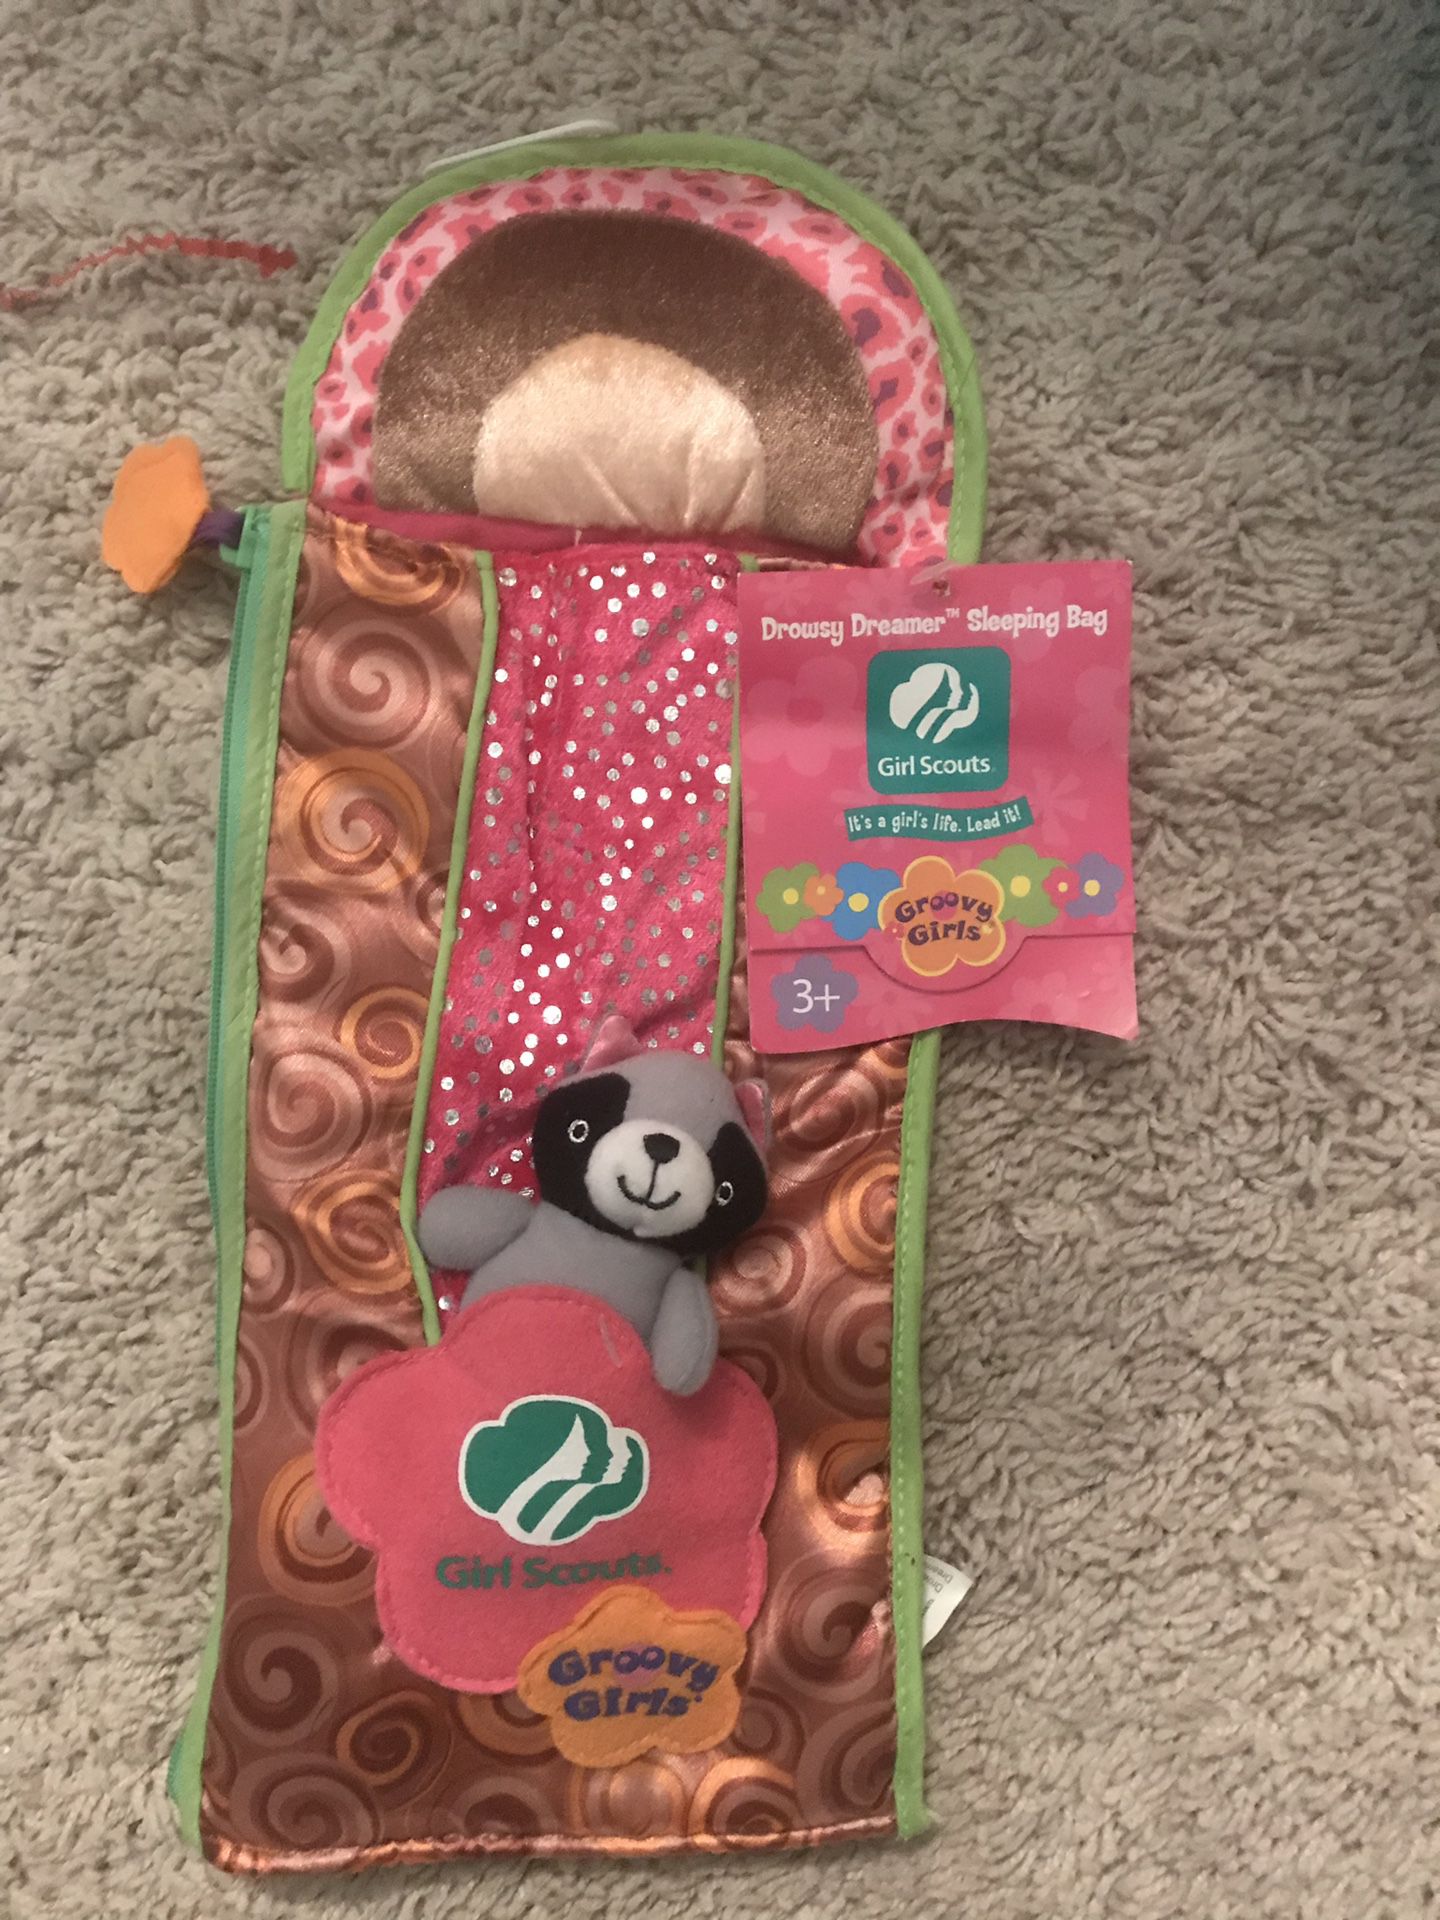 Girl Scout sleeping bag for a groovy girl doll